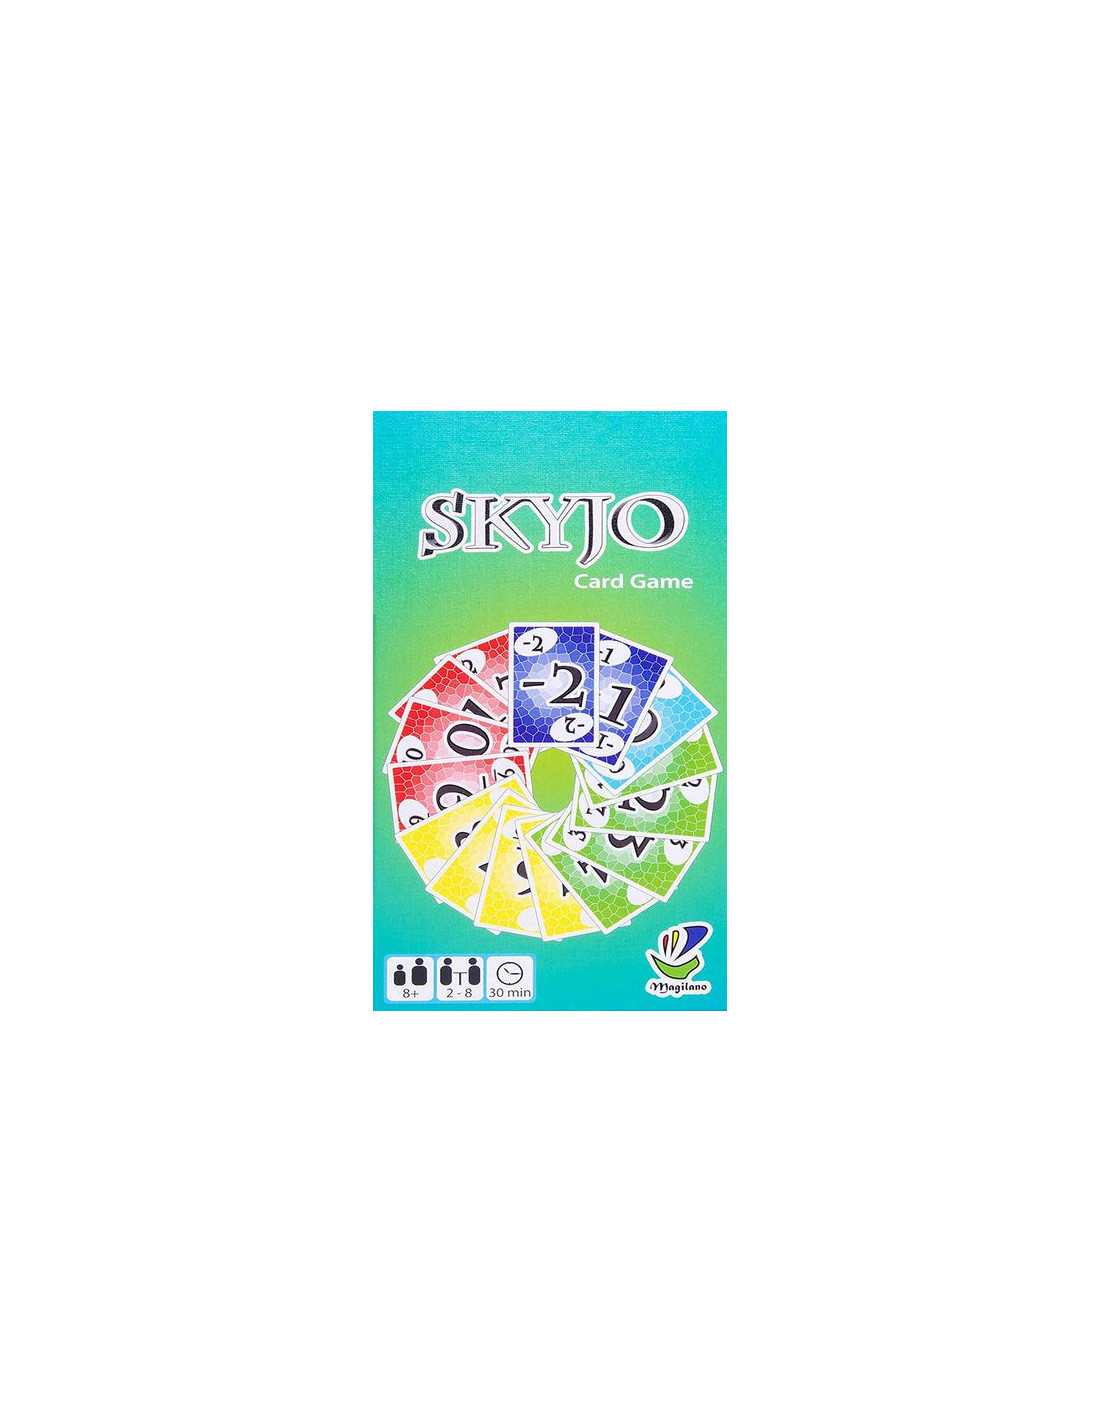 SKYJO The Ultimate Card Game for Kids and Adults MA300715 NEW and SEALED